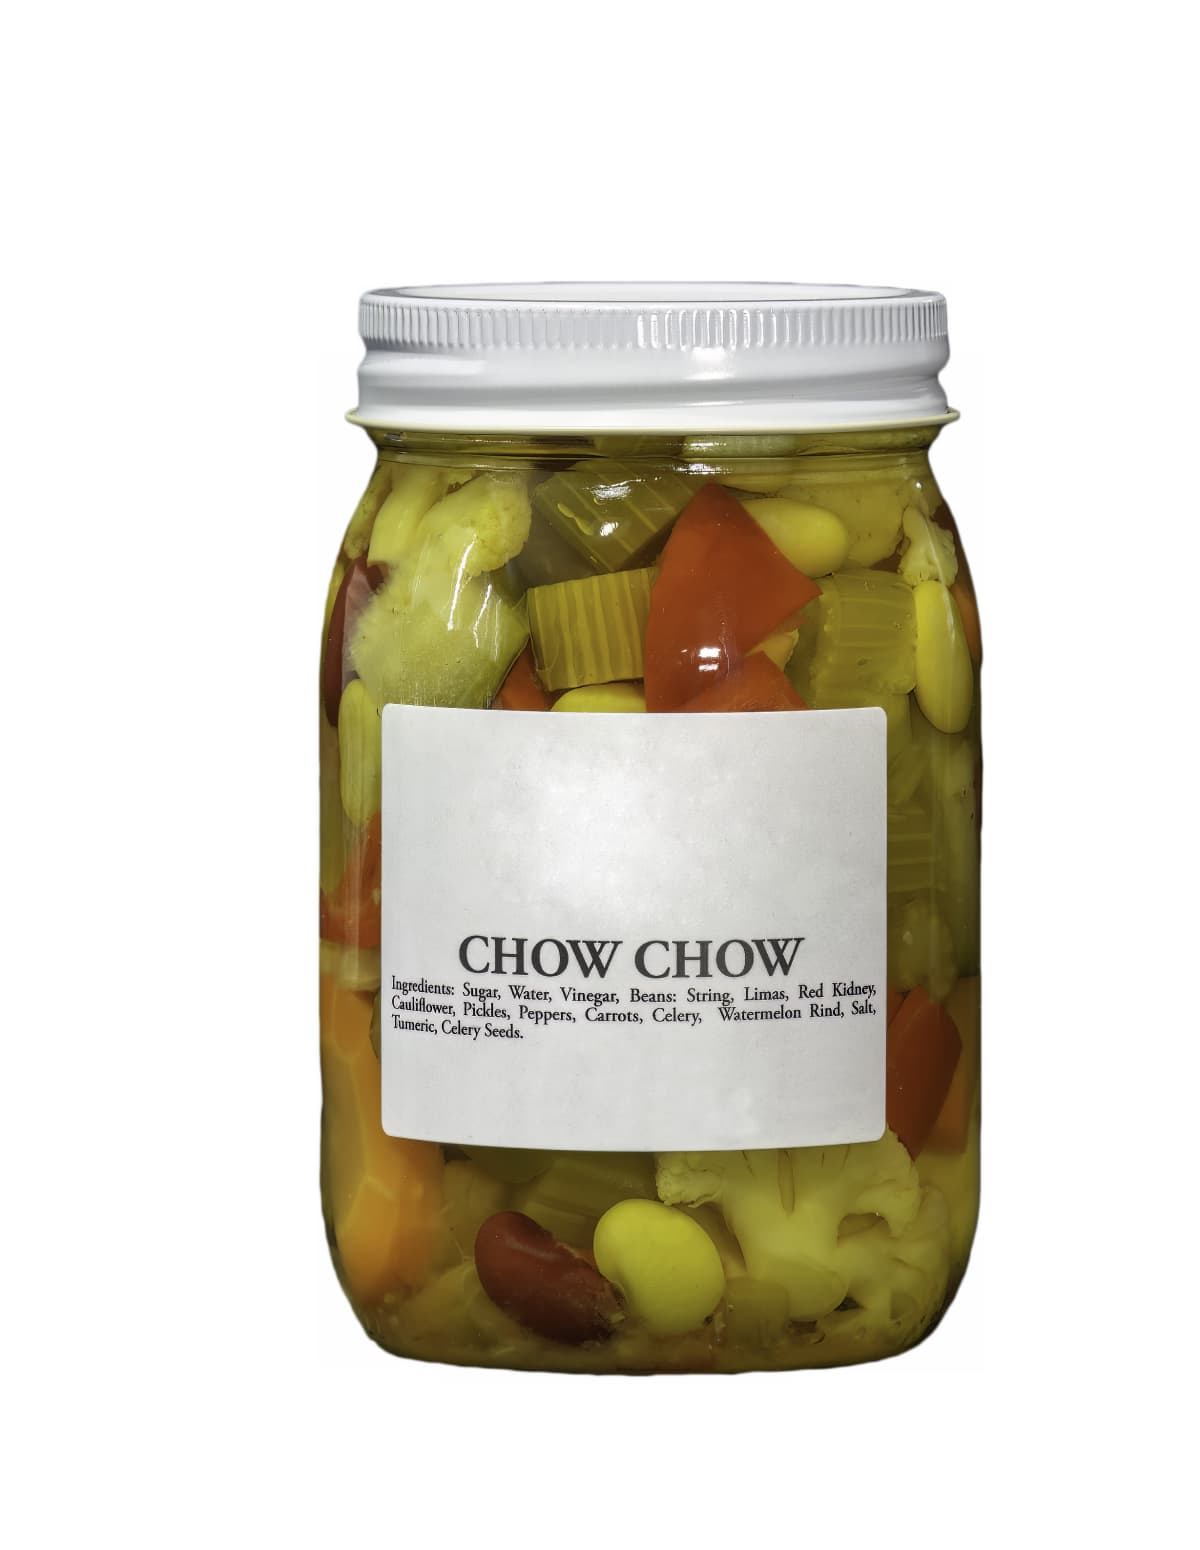 Canned Chow Chow in a Jar, with a White Label Stating it